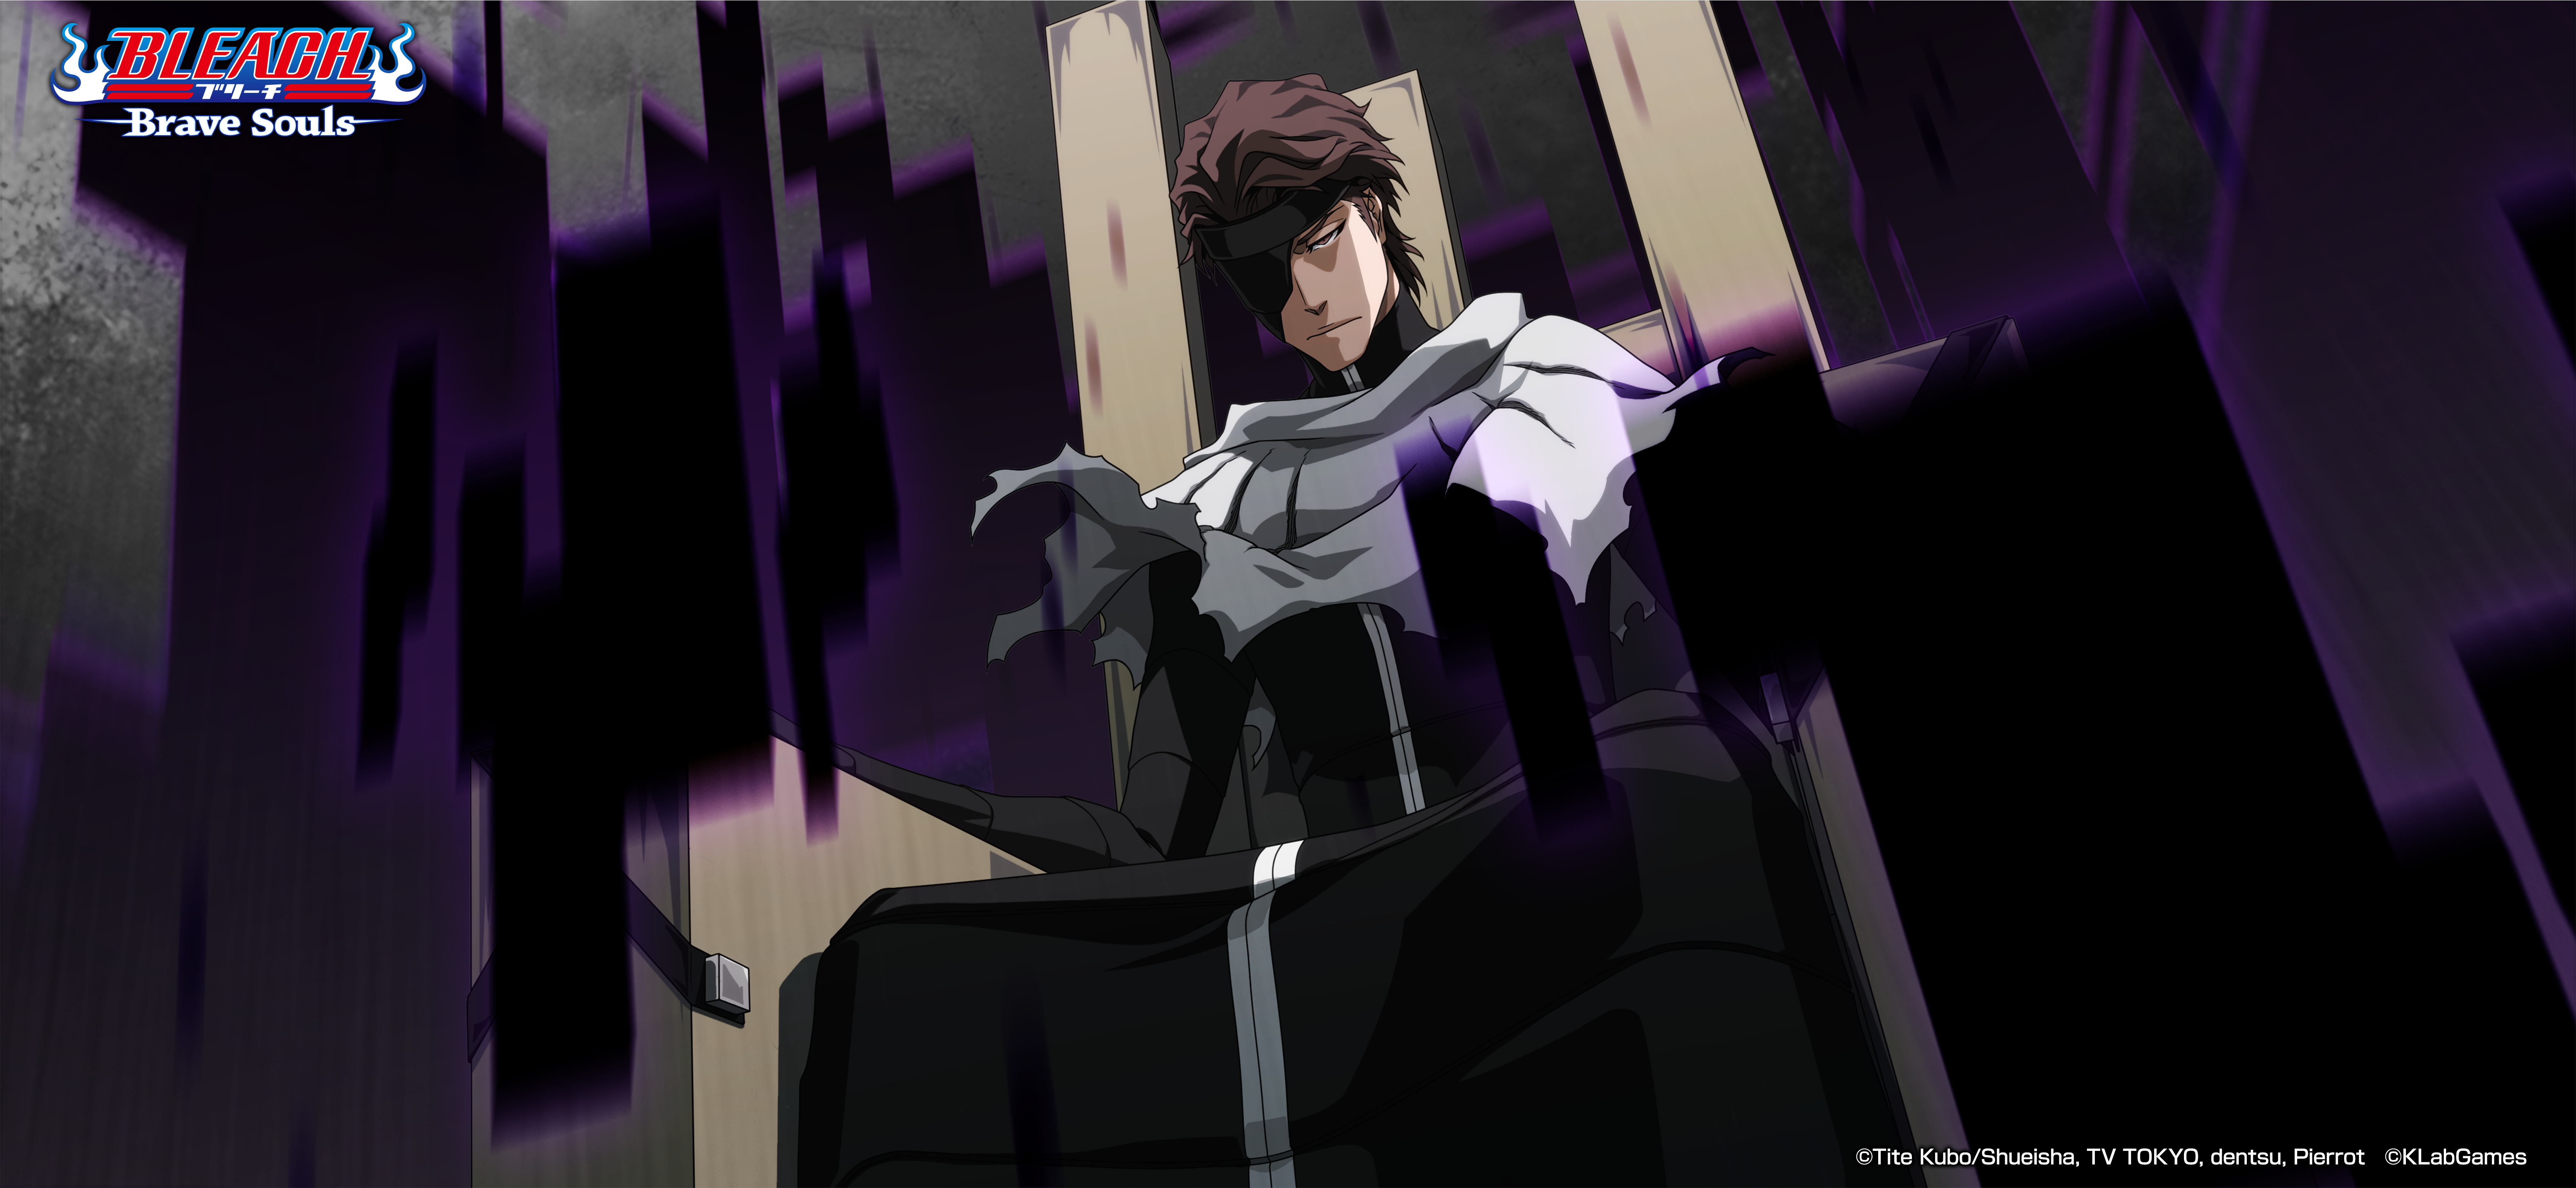 Anime gets yet another quality game with Bleach: Soul Liberation